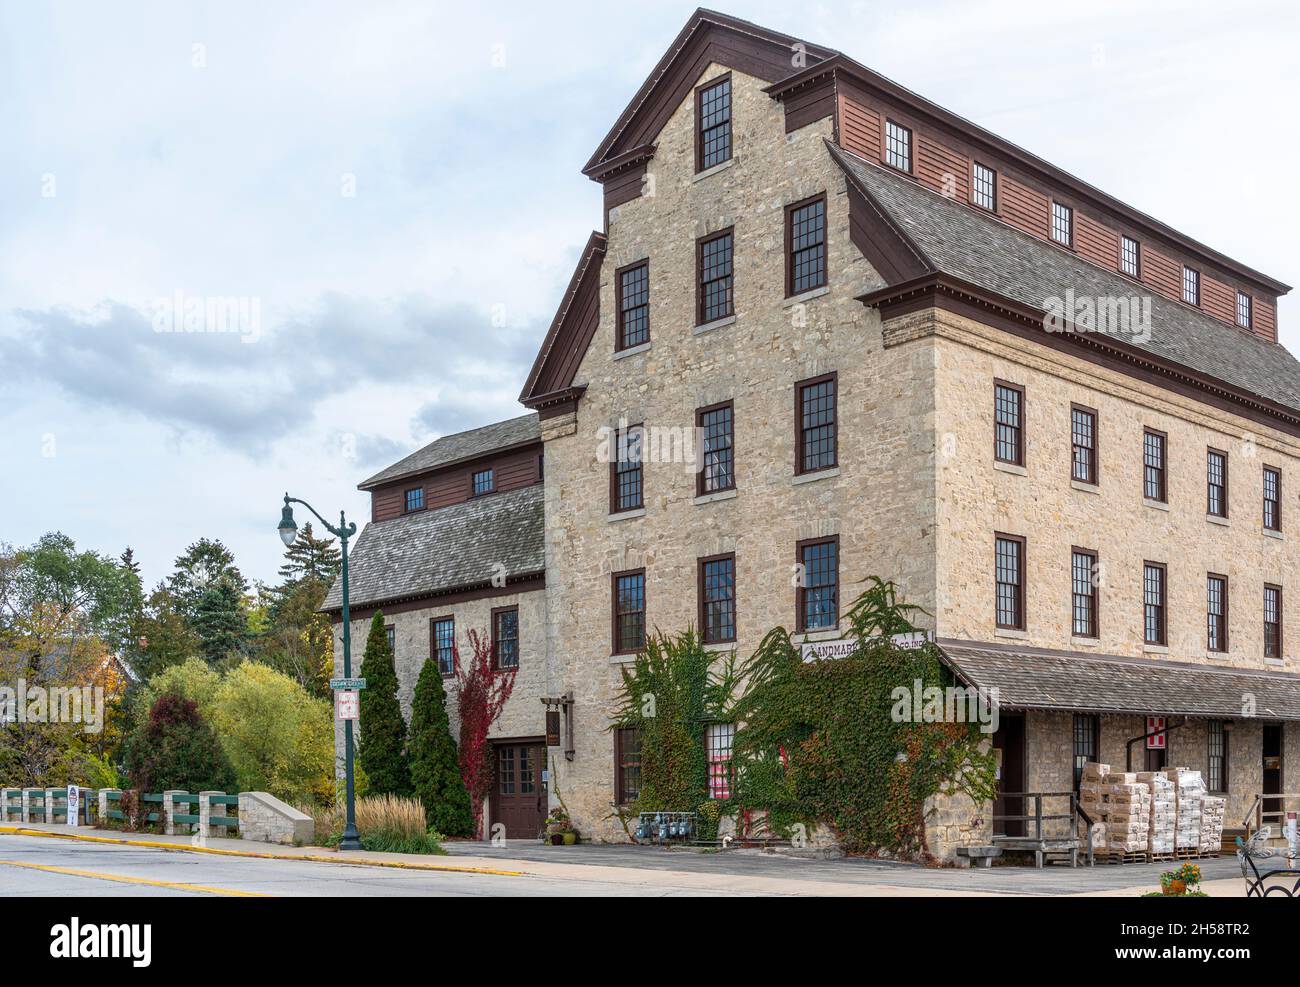 Cedarburg's iconic building built on Cedar Creek in 1855 by Frederick Hilgen and William Schroeder for grinding and milling flour Stock Photo